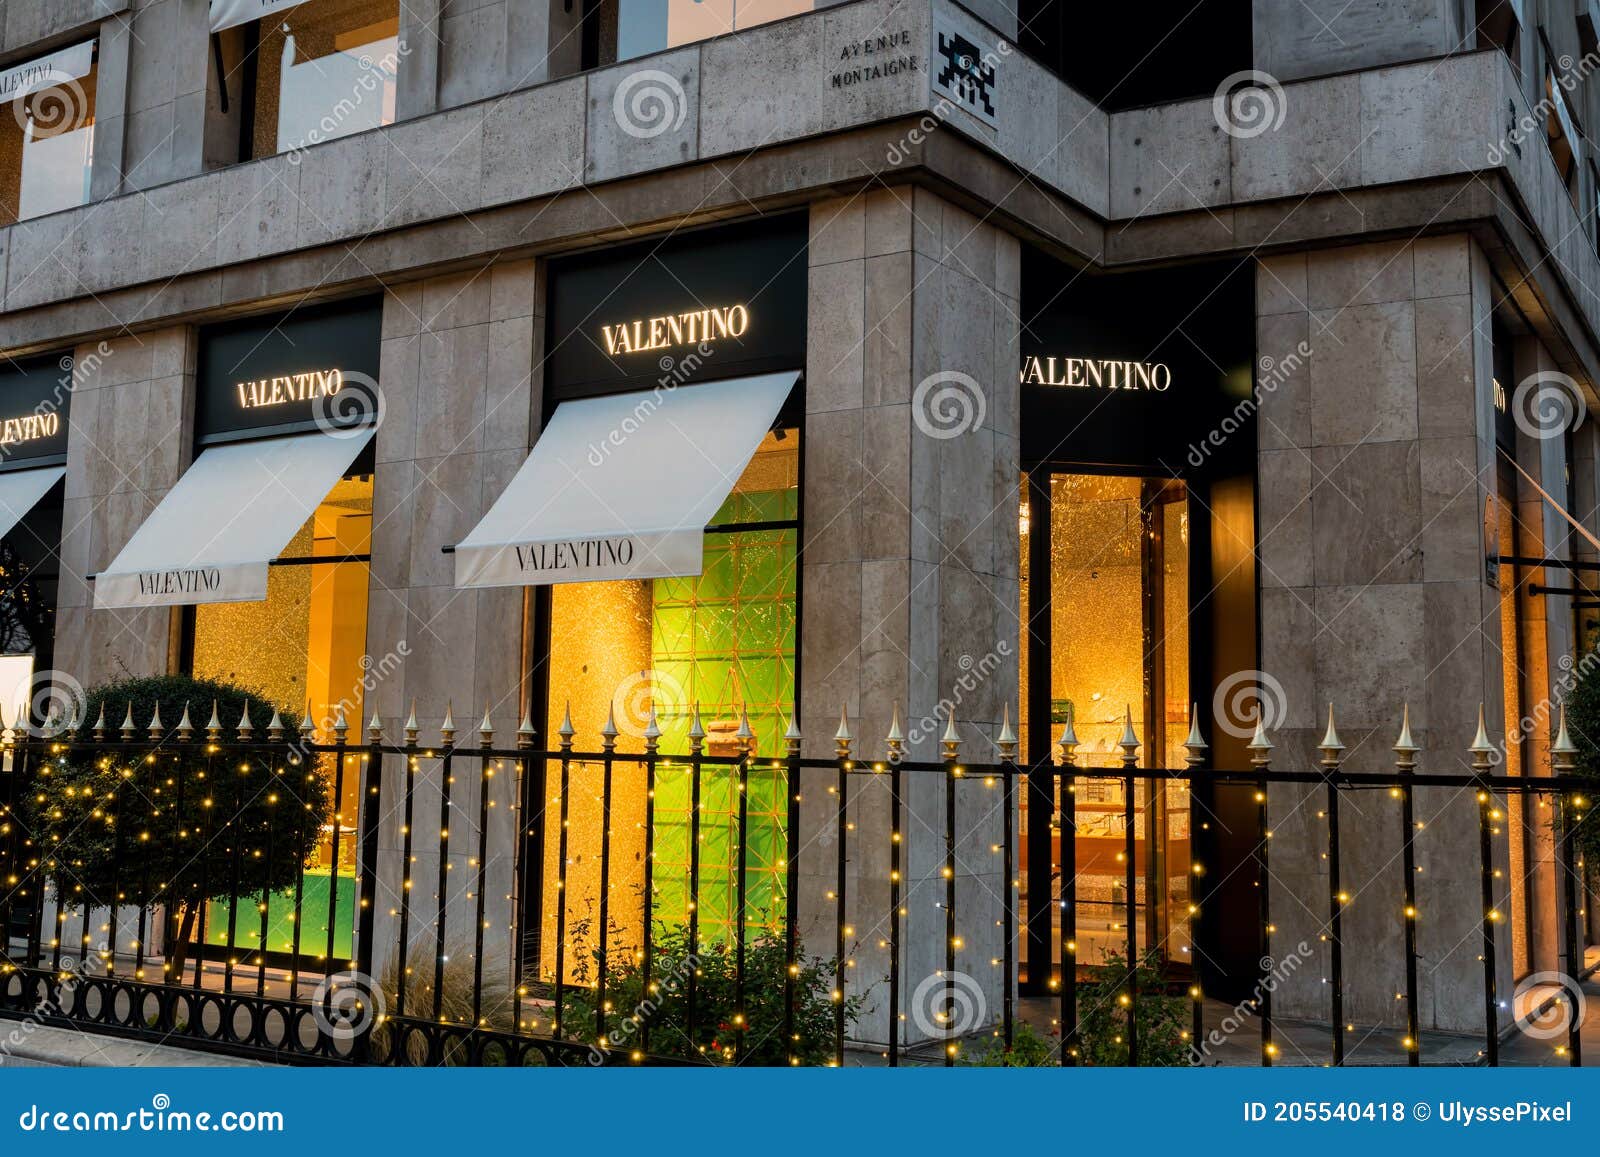 Valentino with Christmas Lights on Avenue Montaigne - Paris, France  Editorial Stock Photo - Image of capital, december: 205540418